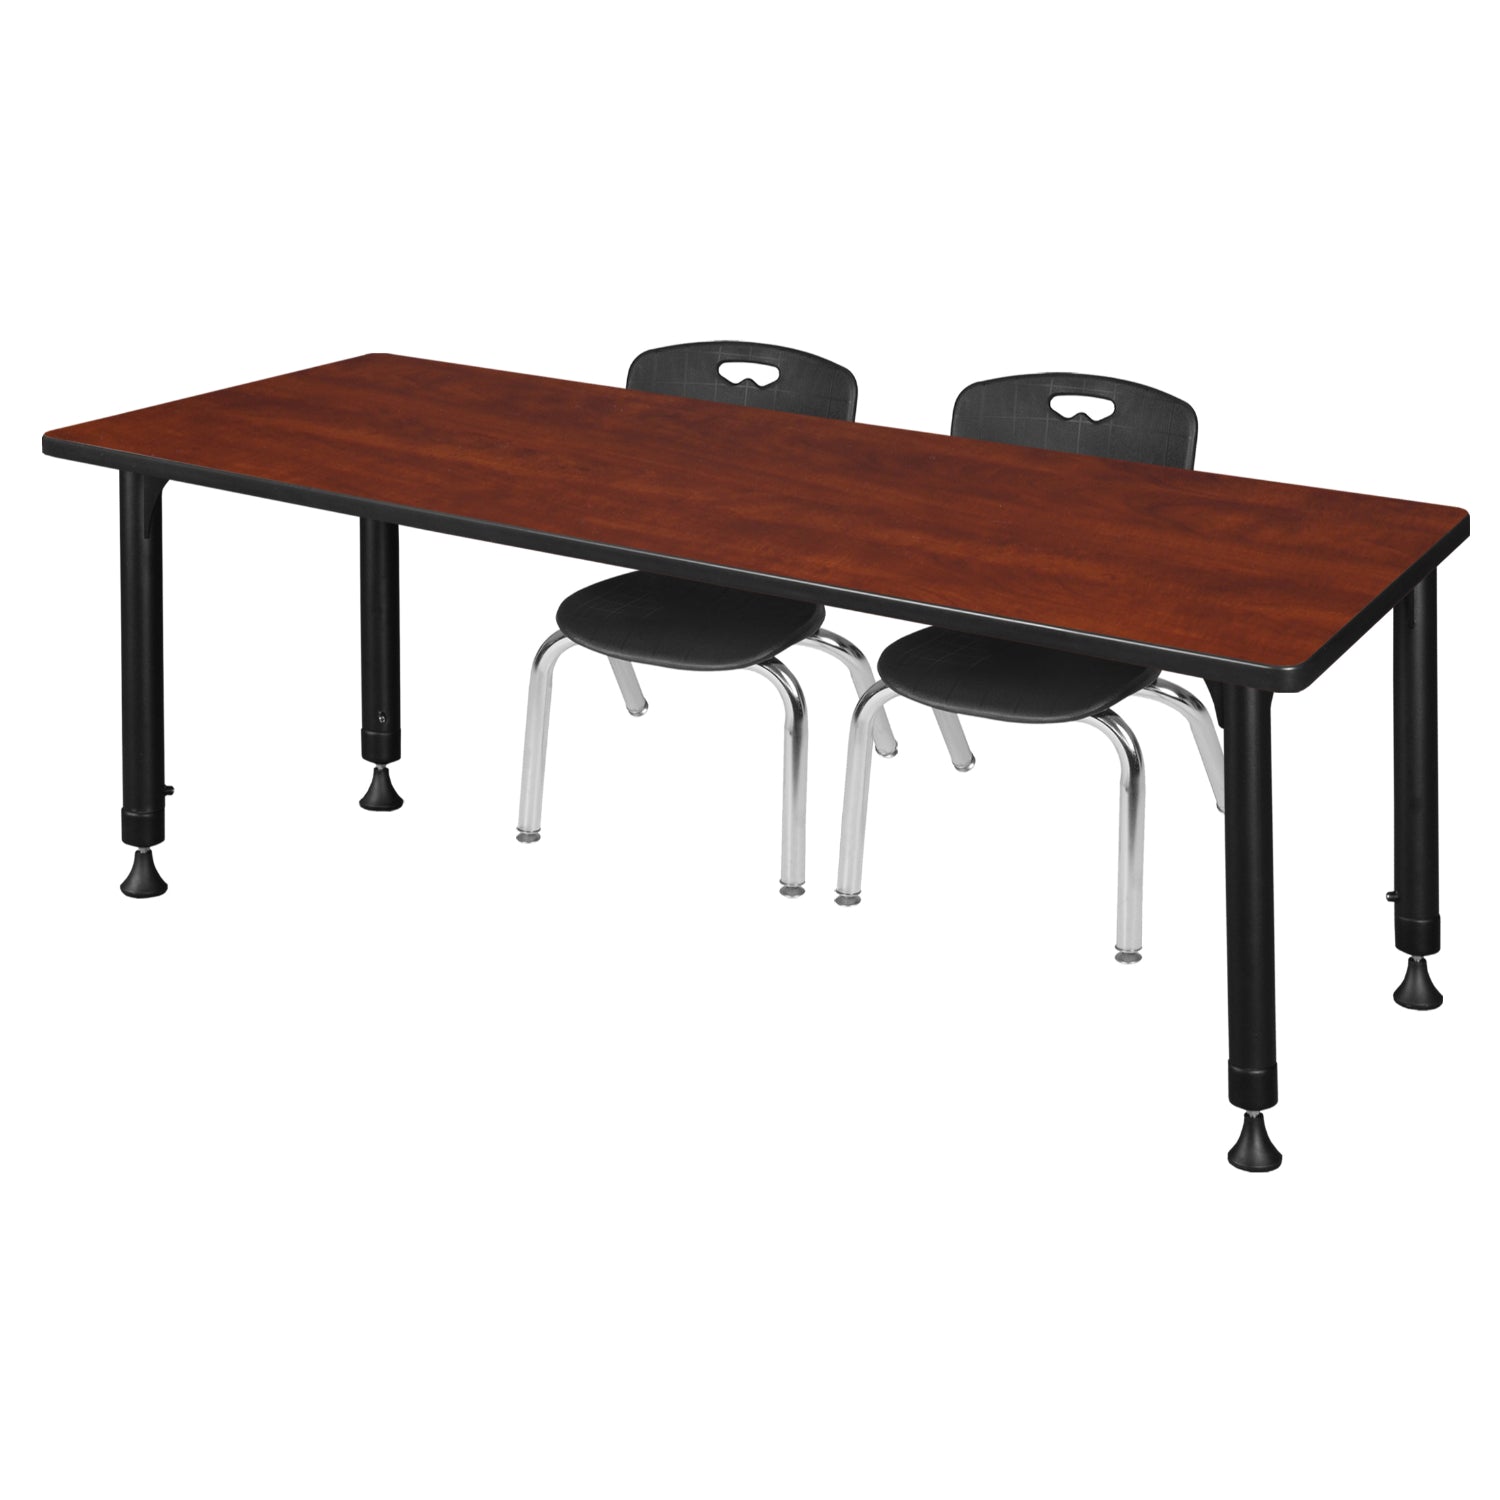 Kee Classroom Table and Chair Package, Kee 66" x 24" Rectangular Adjustable Height Table with 2 Andy 12" Stack Chairs